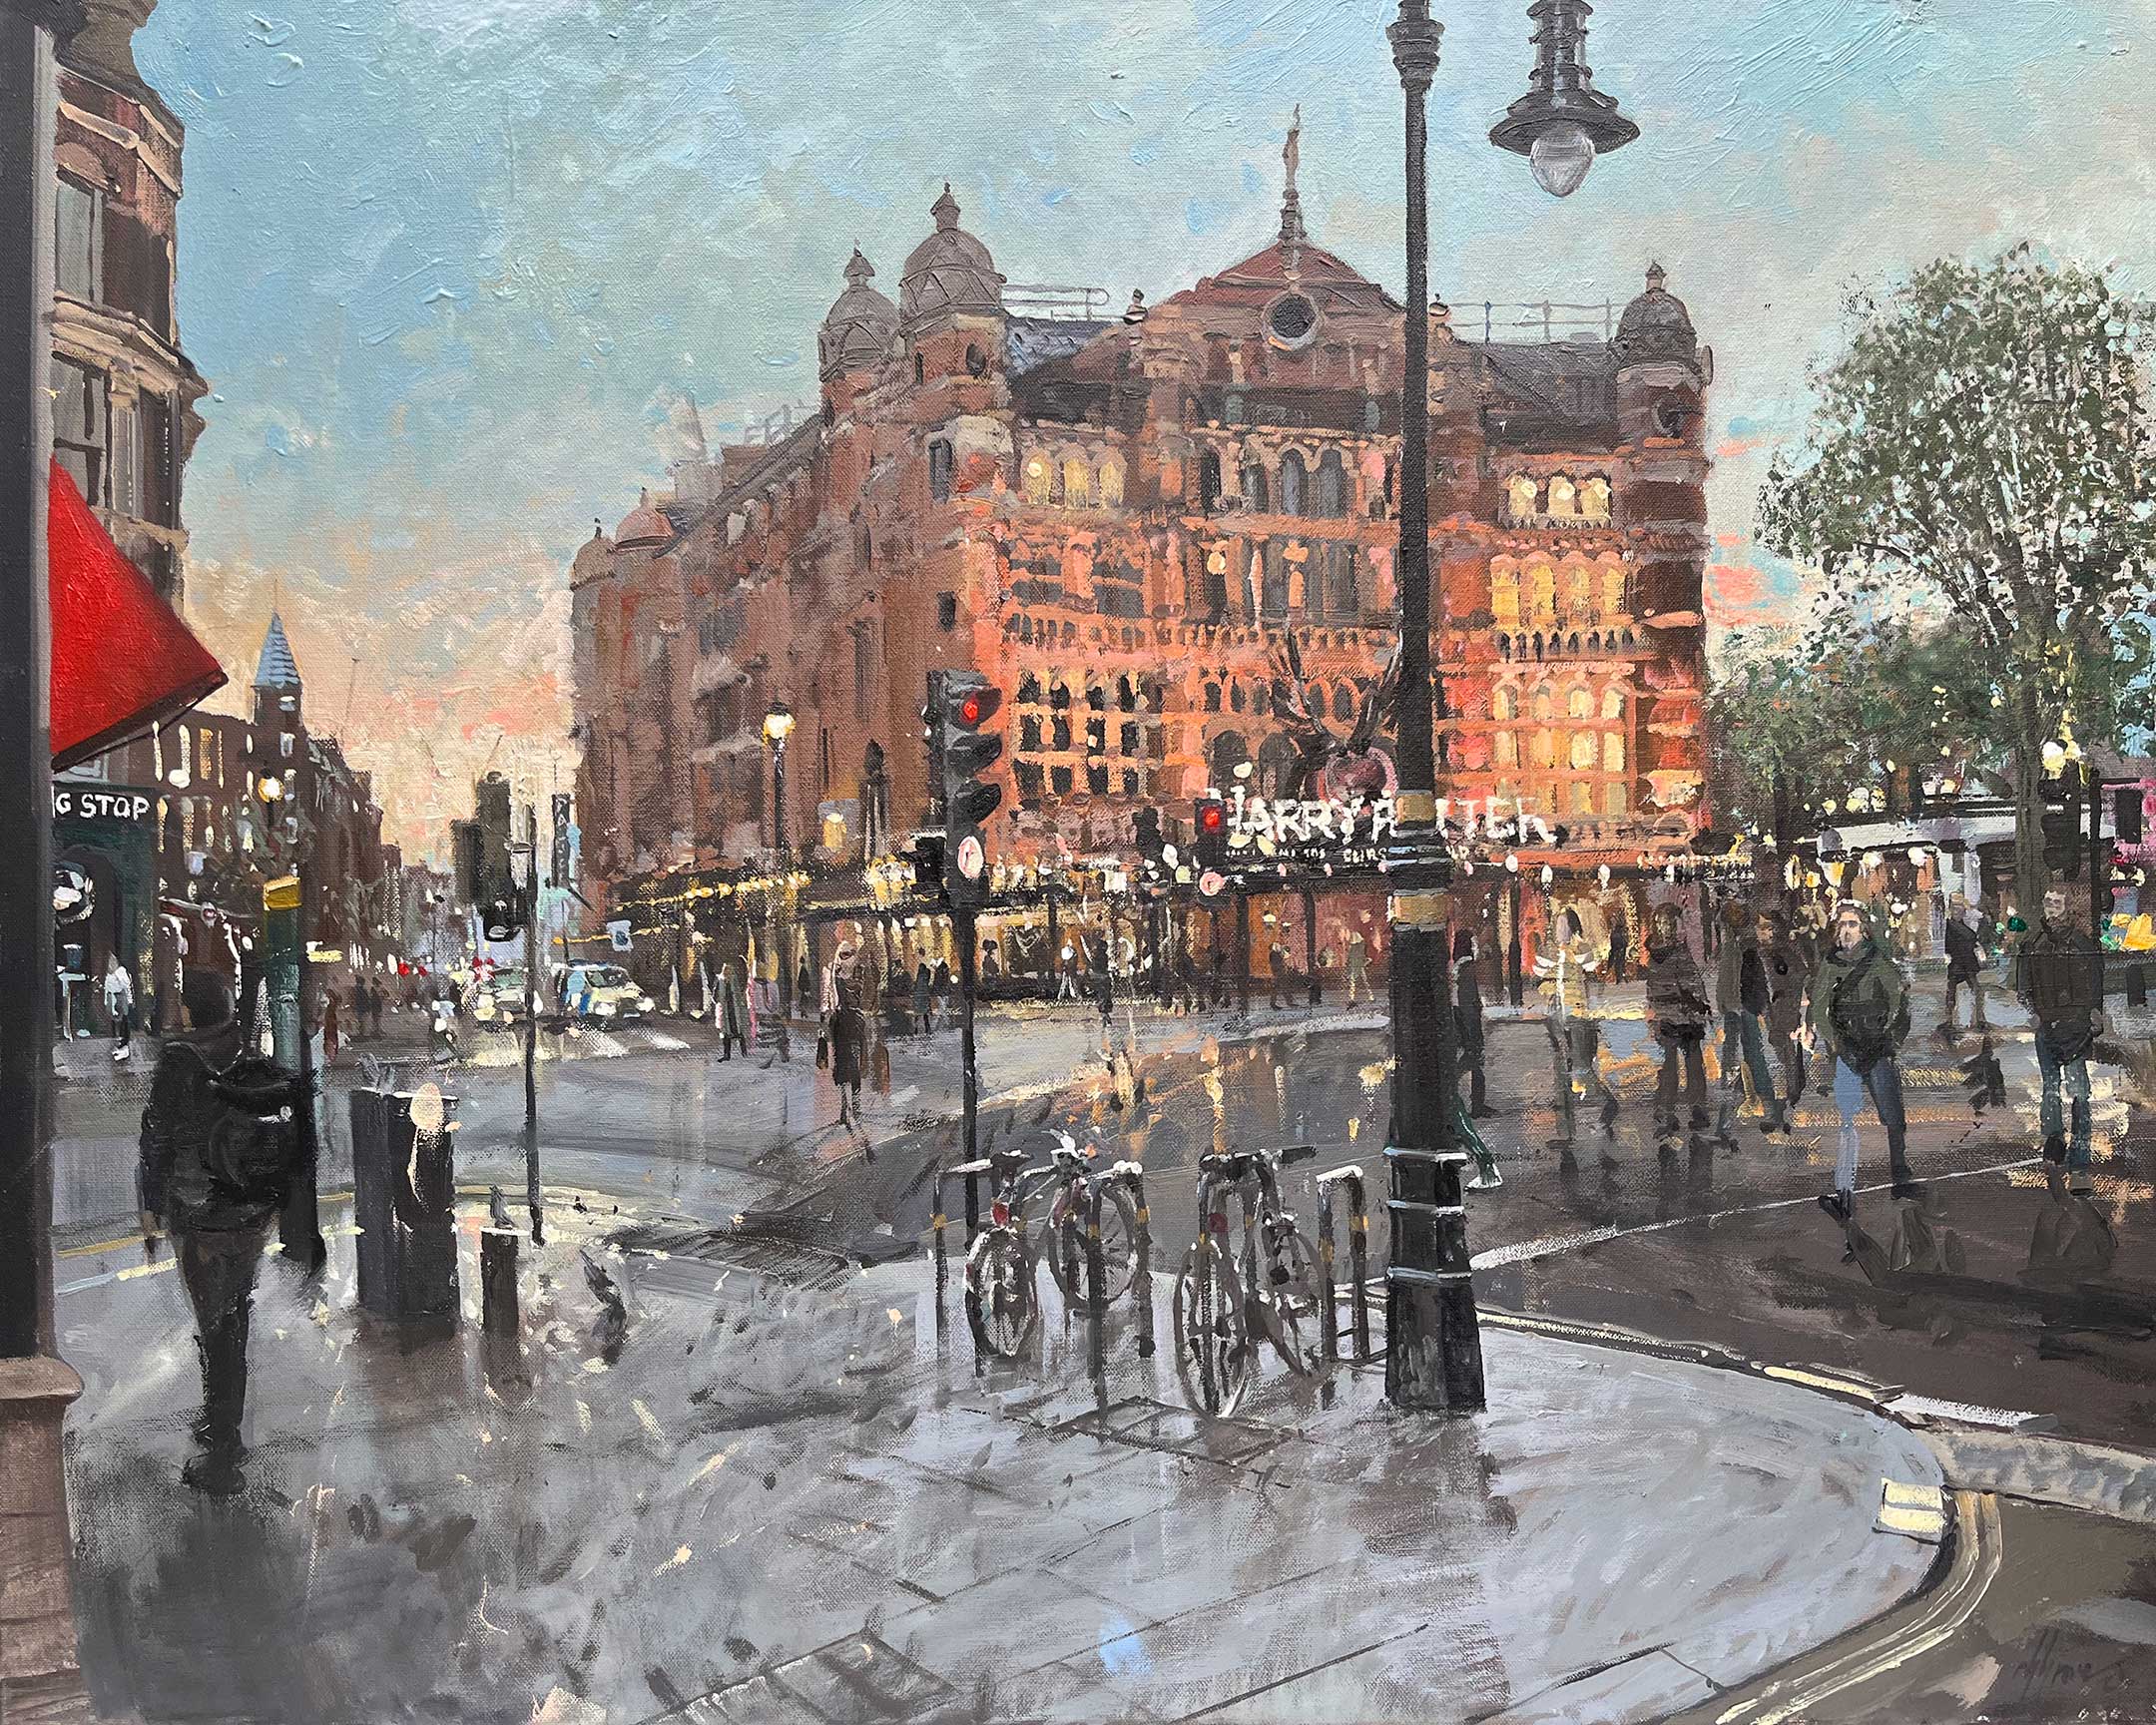 'Wizardry and Witchcraft at Cambridge Circus', 24x30in, oil on canvas, an original oil painting by award winning artist Nick Grove RSMA.